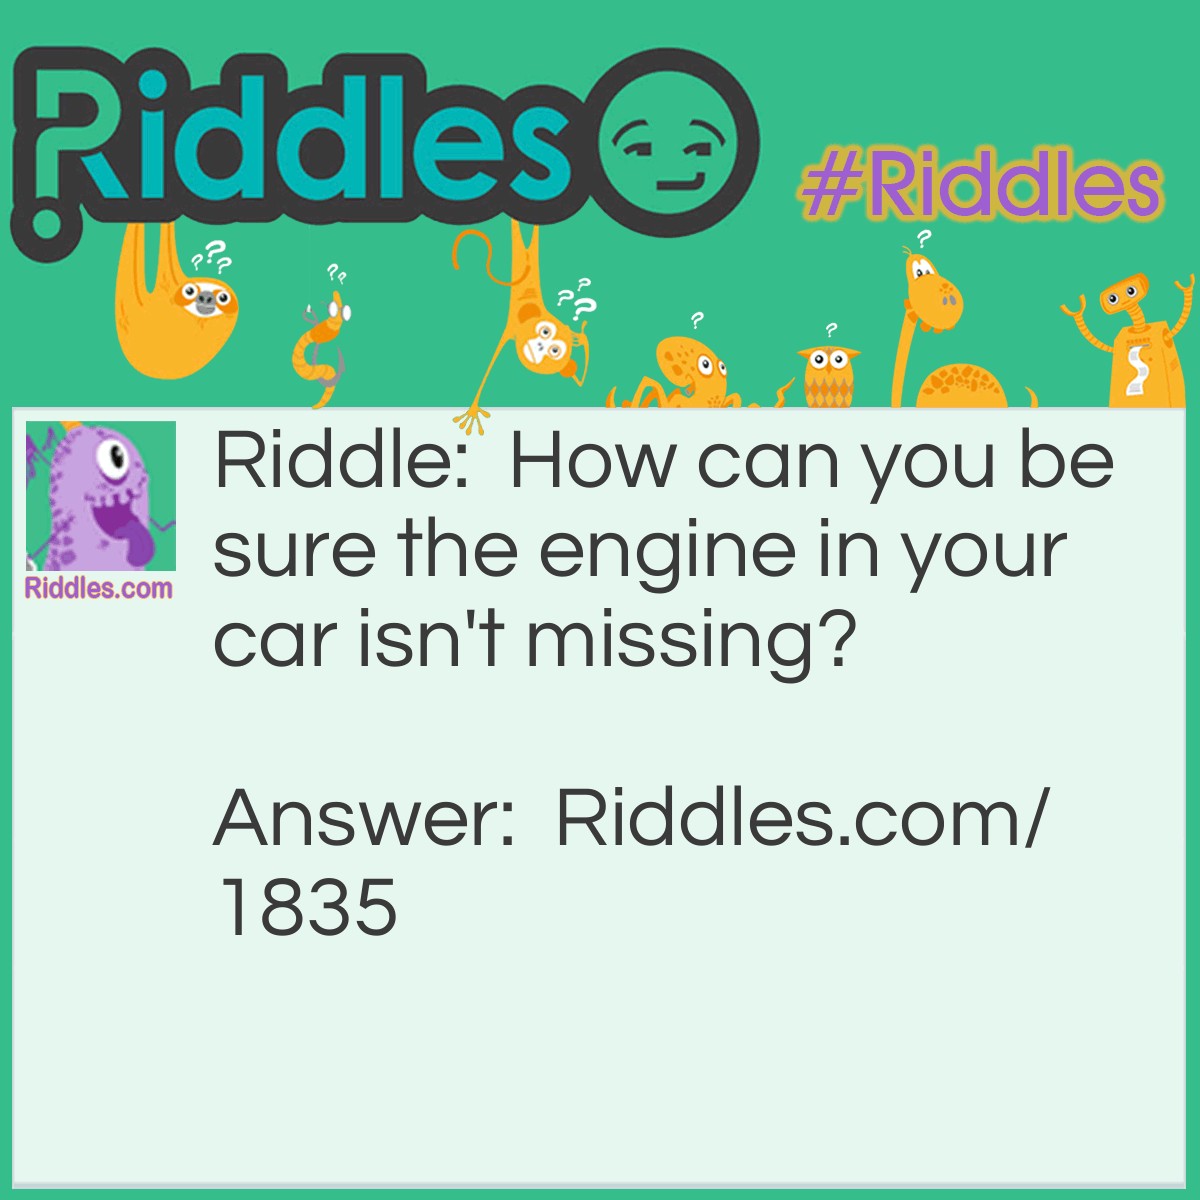 Riddle: How can you be sure the engine in your car isn't missing? Answer: Lift the hood and look in.